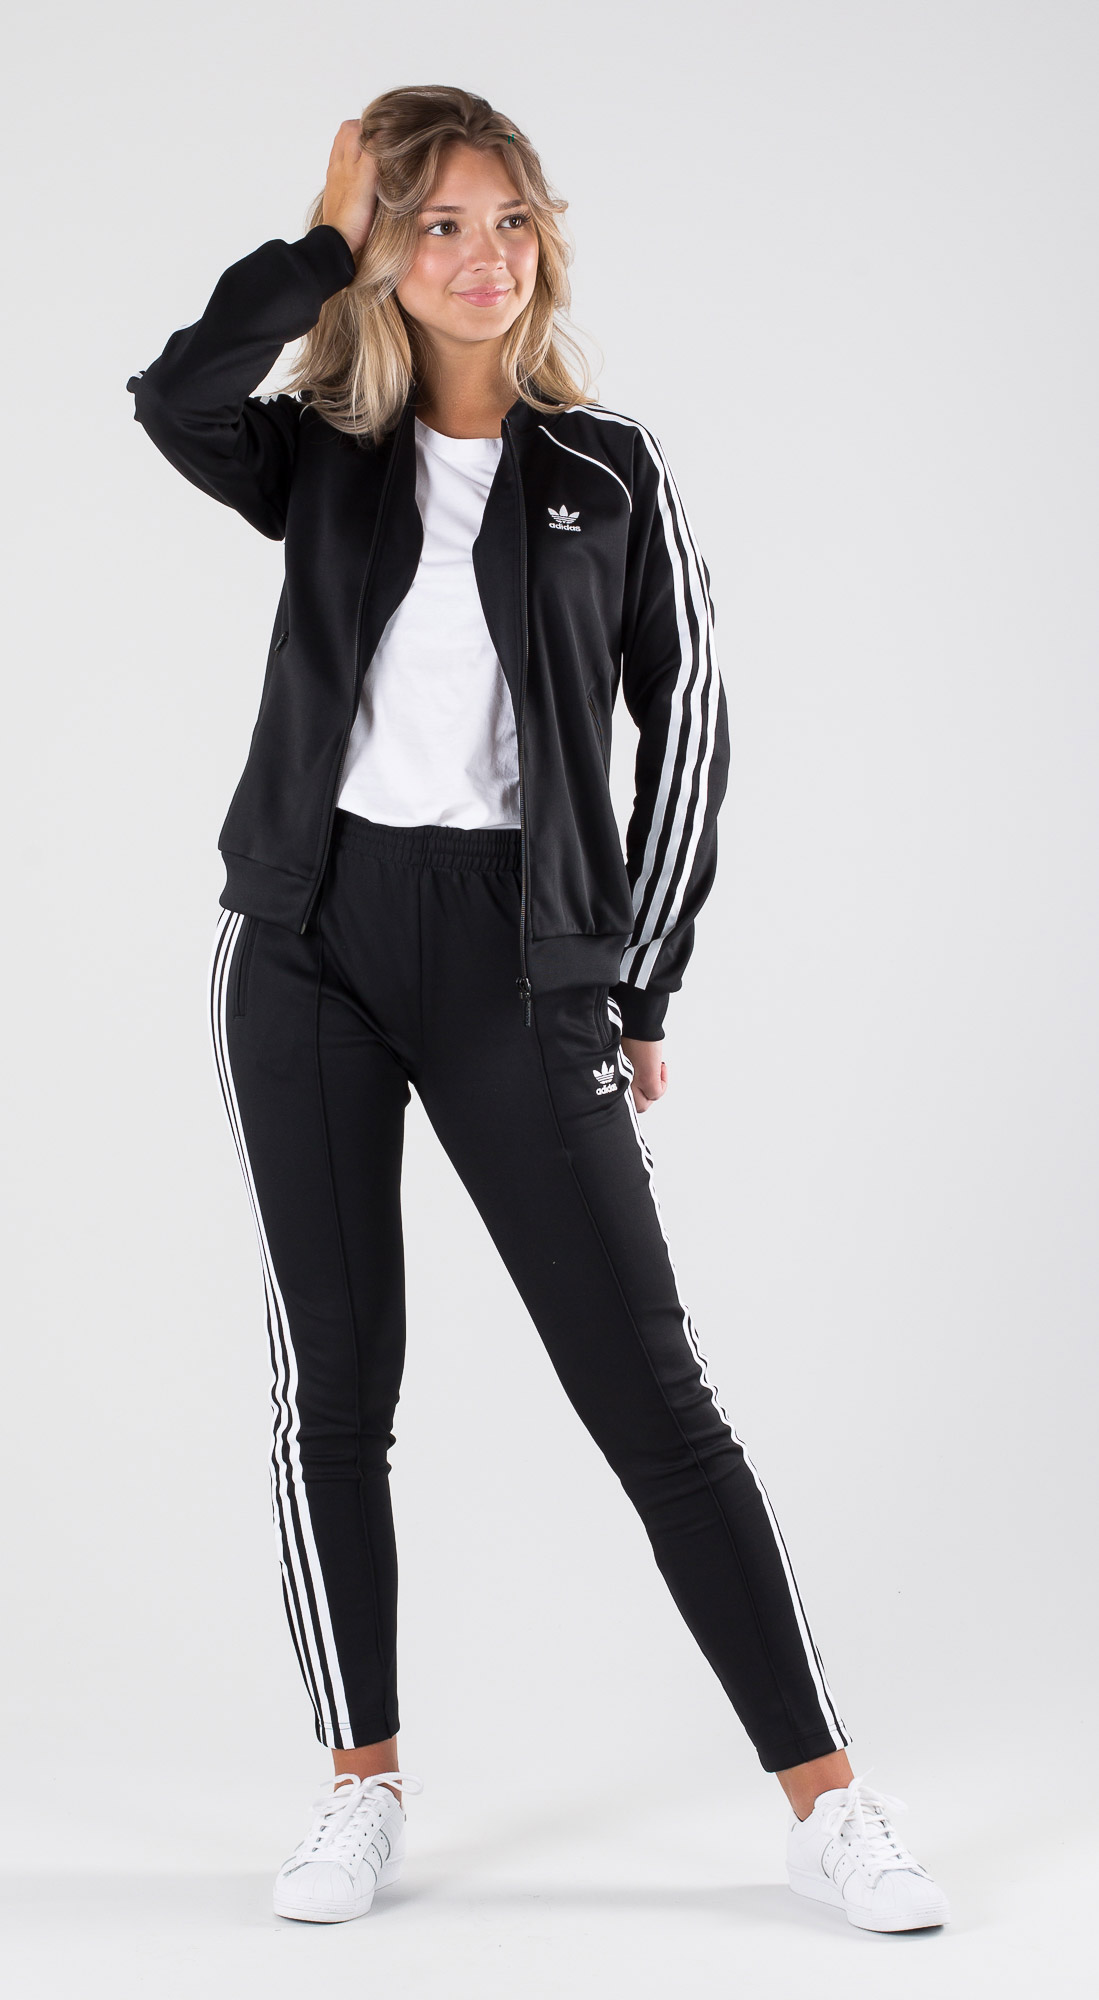 adidas outfit images